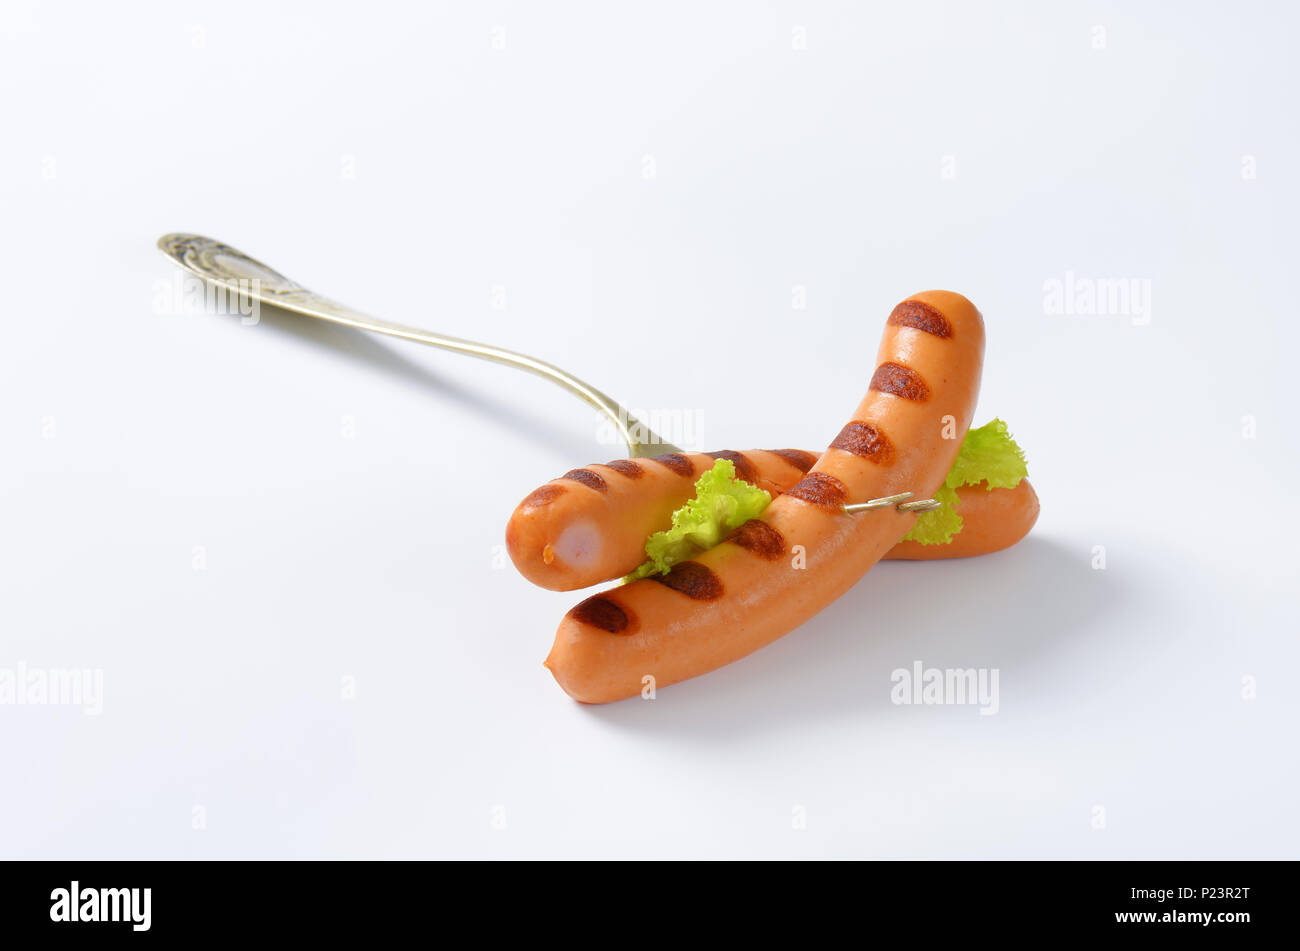 grilled wiener sausages impaled on fork Stock Photo